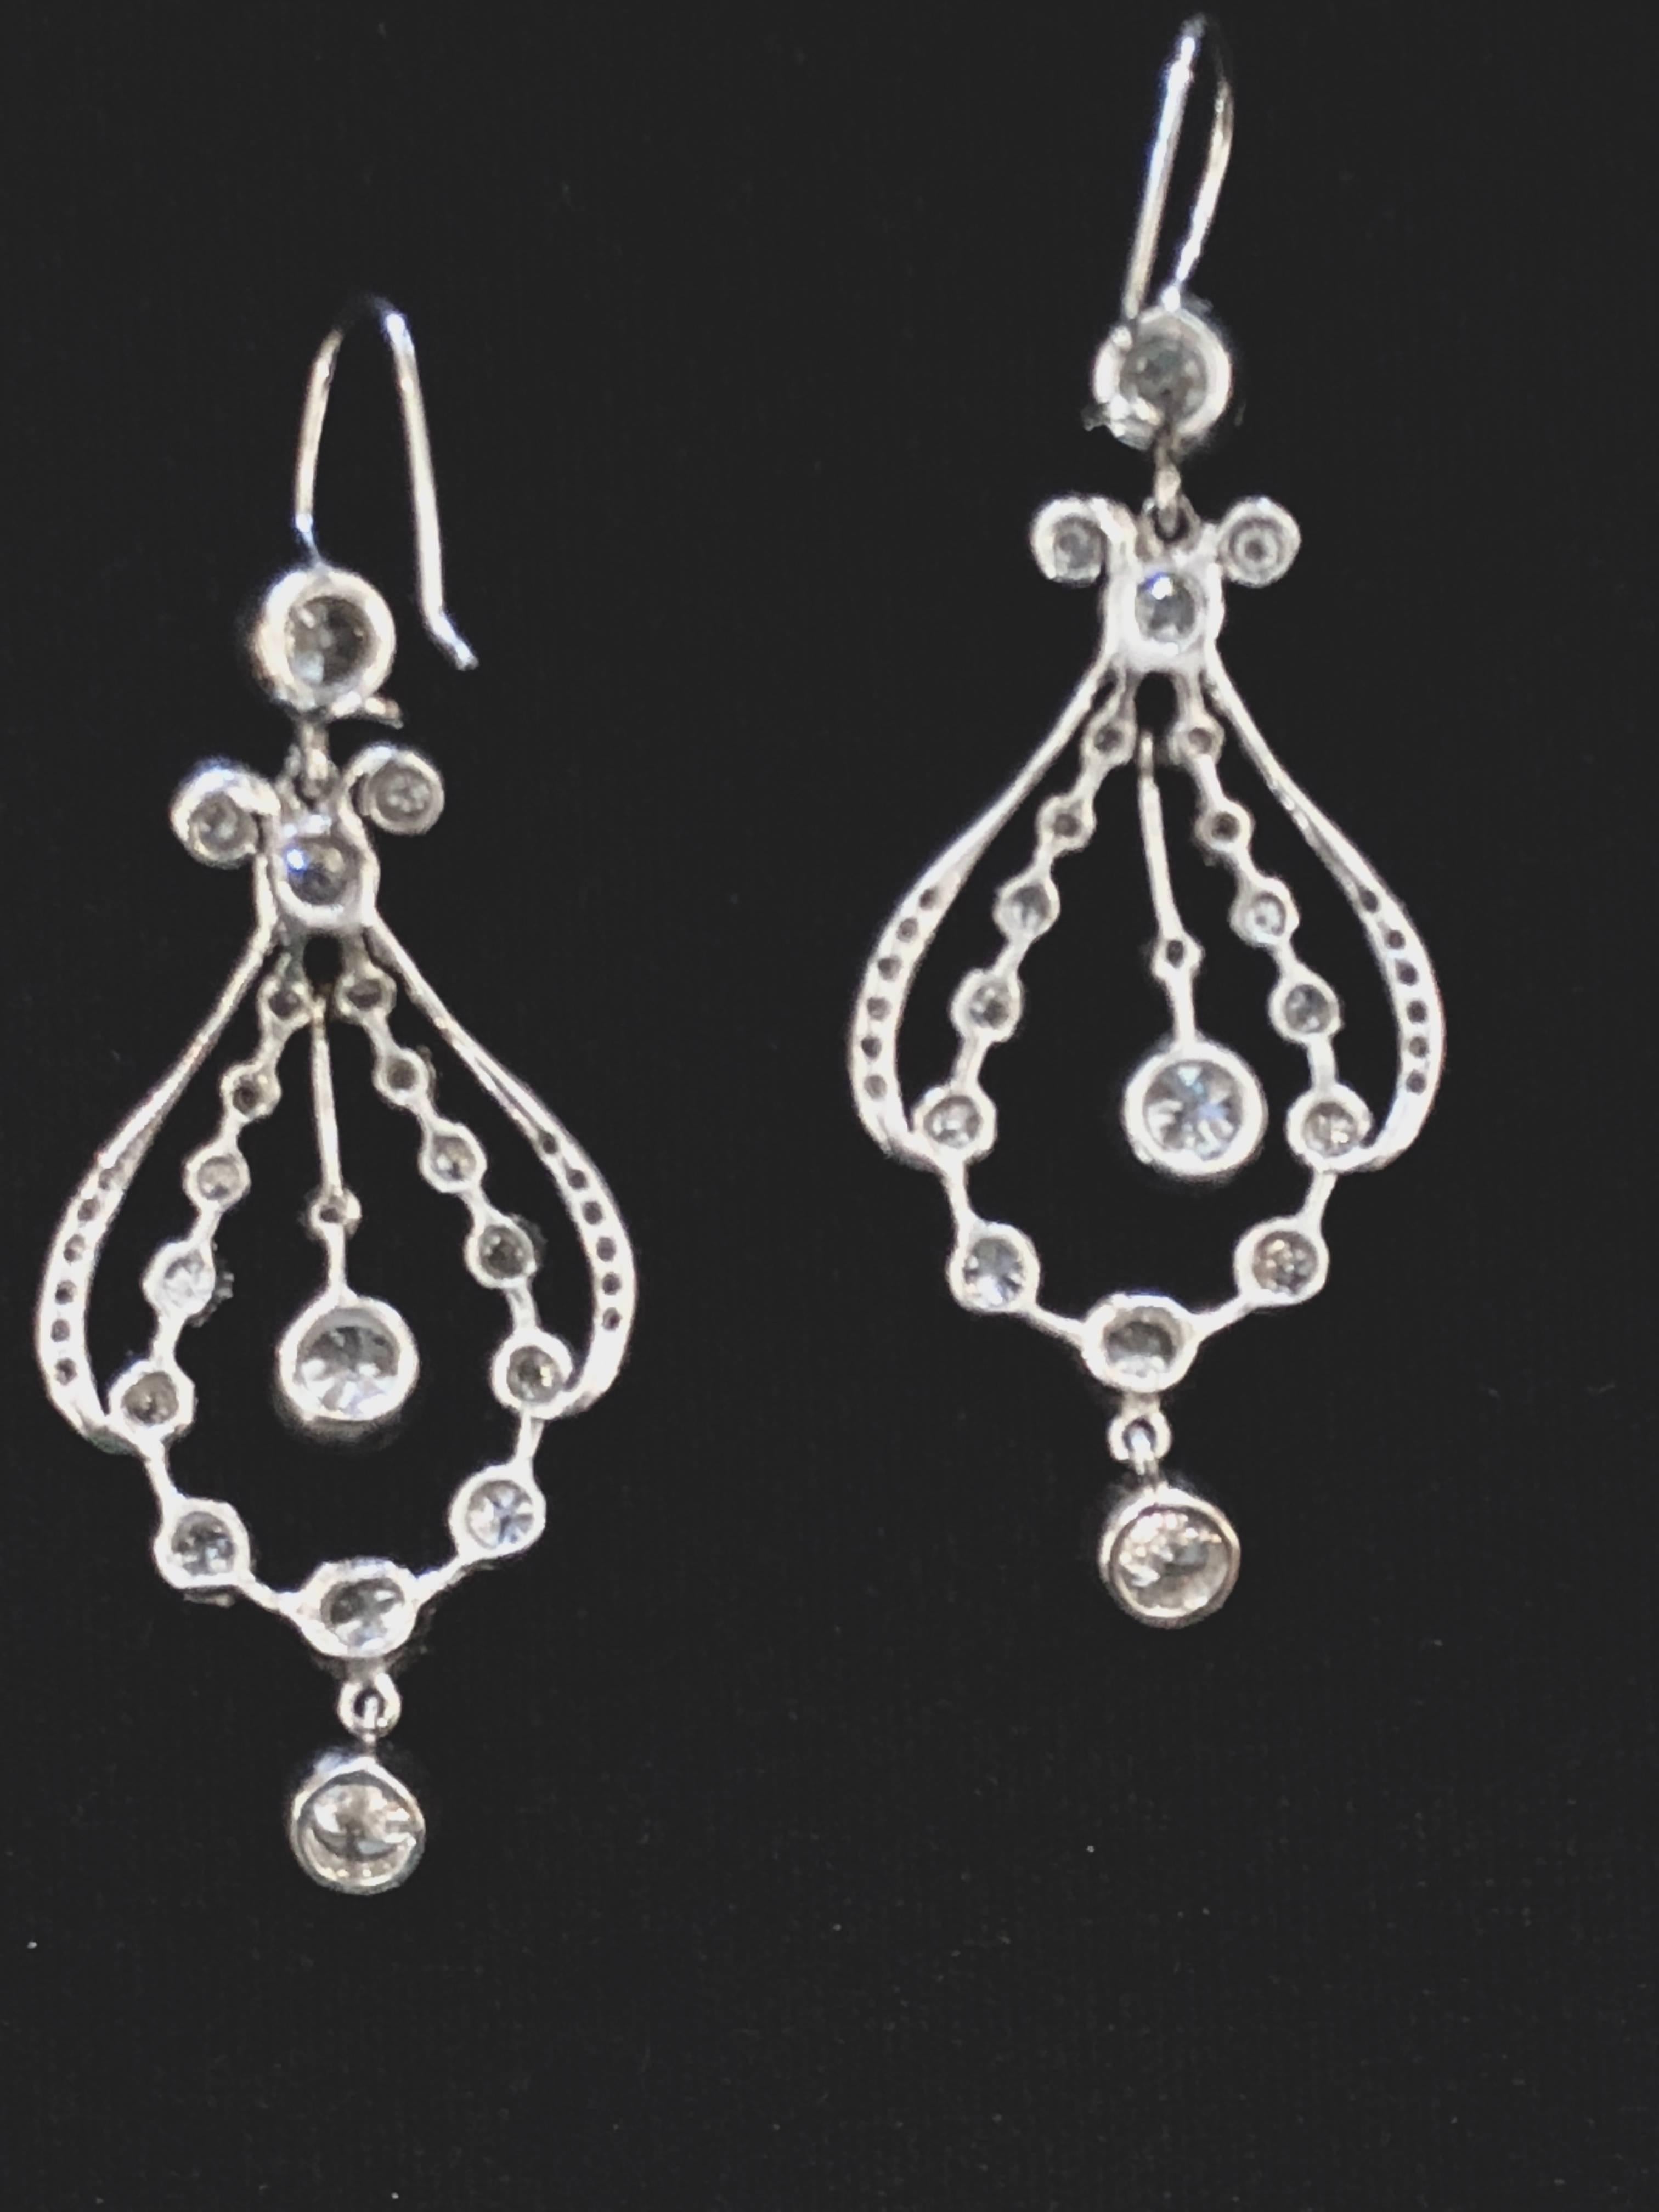 Diamond and platinum chandelier earrings with approximately 7.30cts of diamonds total.
There are approximately 3.65cts of diamonds per earring. The diamonds are full cut, have G-H color and VS1-SI1 clarity. The earrings are period Art Deco circa.